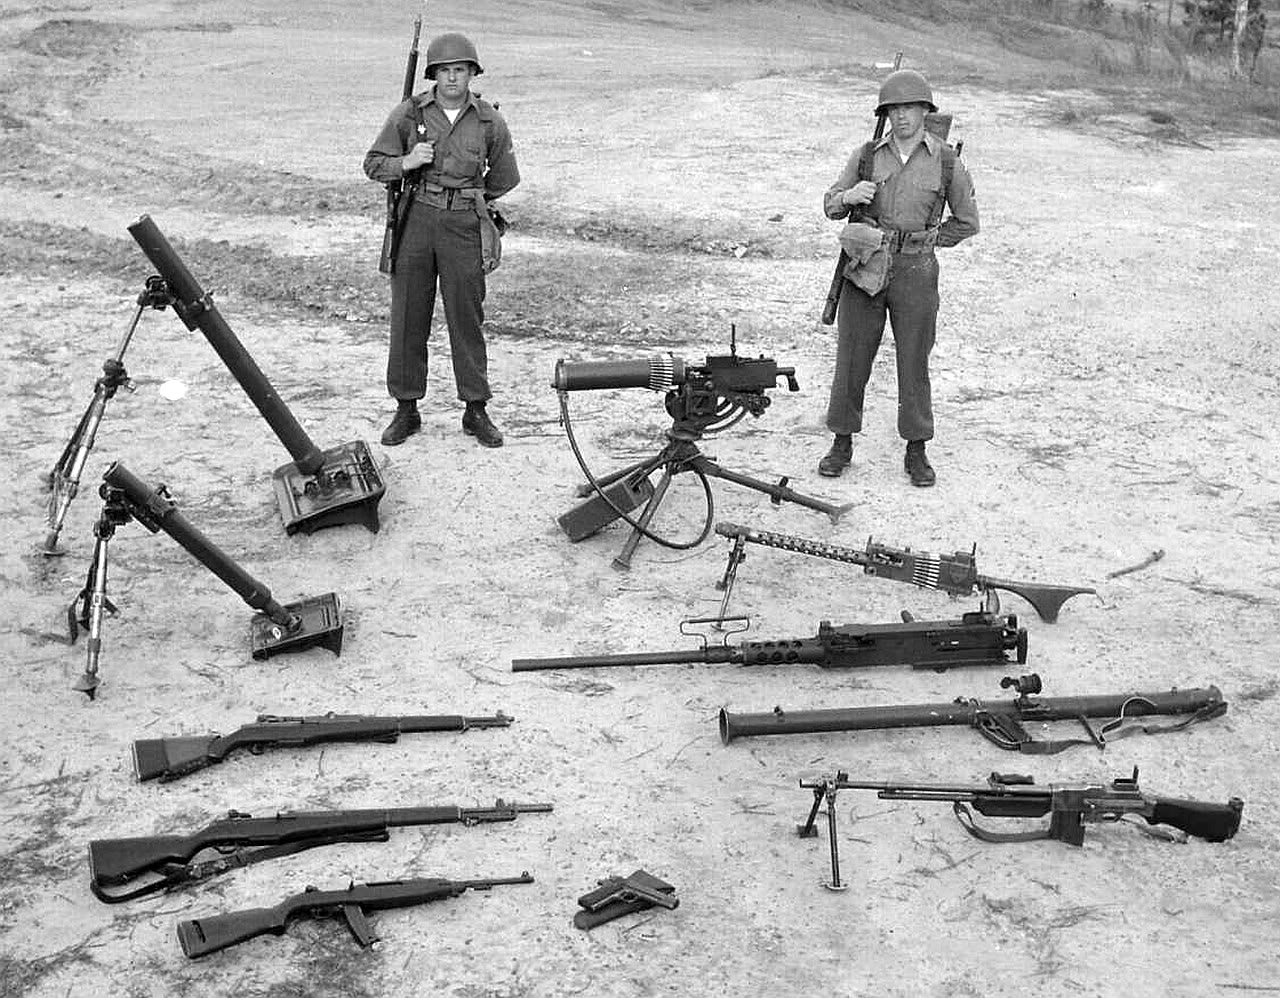 A display of US small arms at Fort Benning 1950